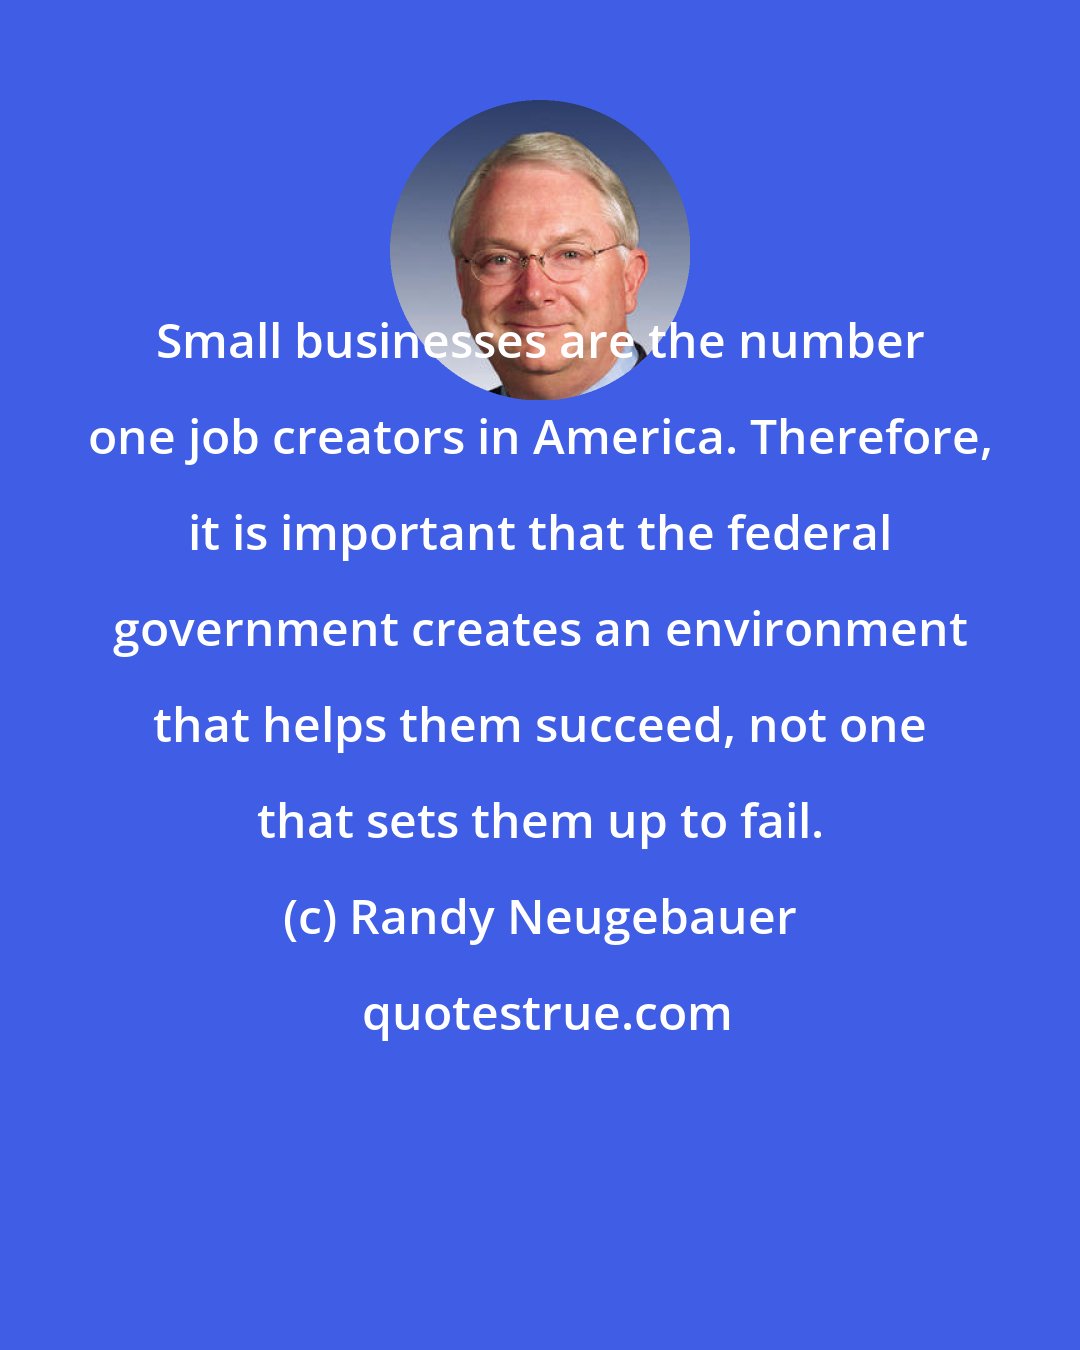 Randy Neugebauer: Small businesses are the number one job creators in America. Therefore, it is important that the federal government creates an environment that helps them succeed, not one that sets them up to fail.